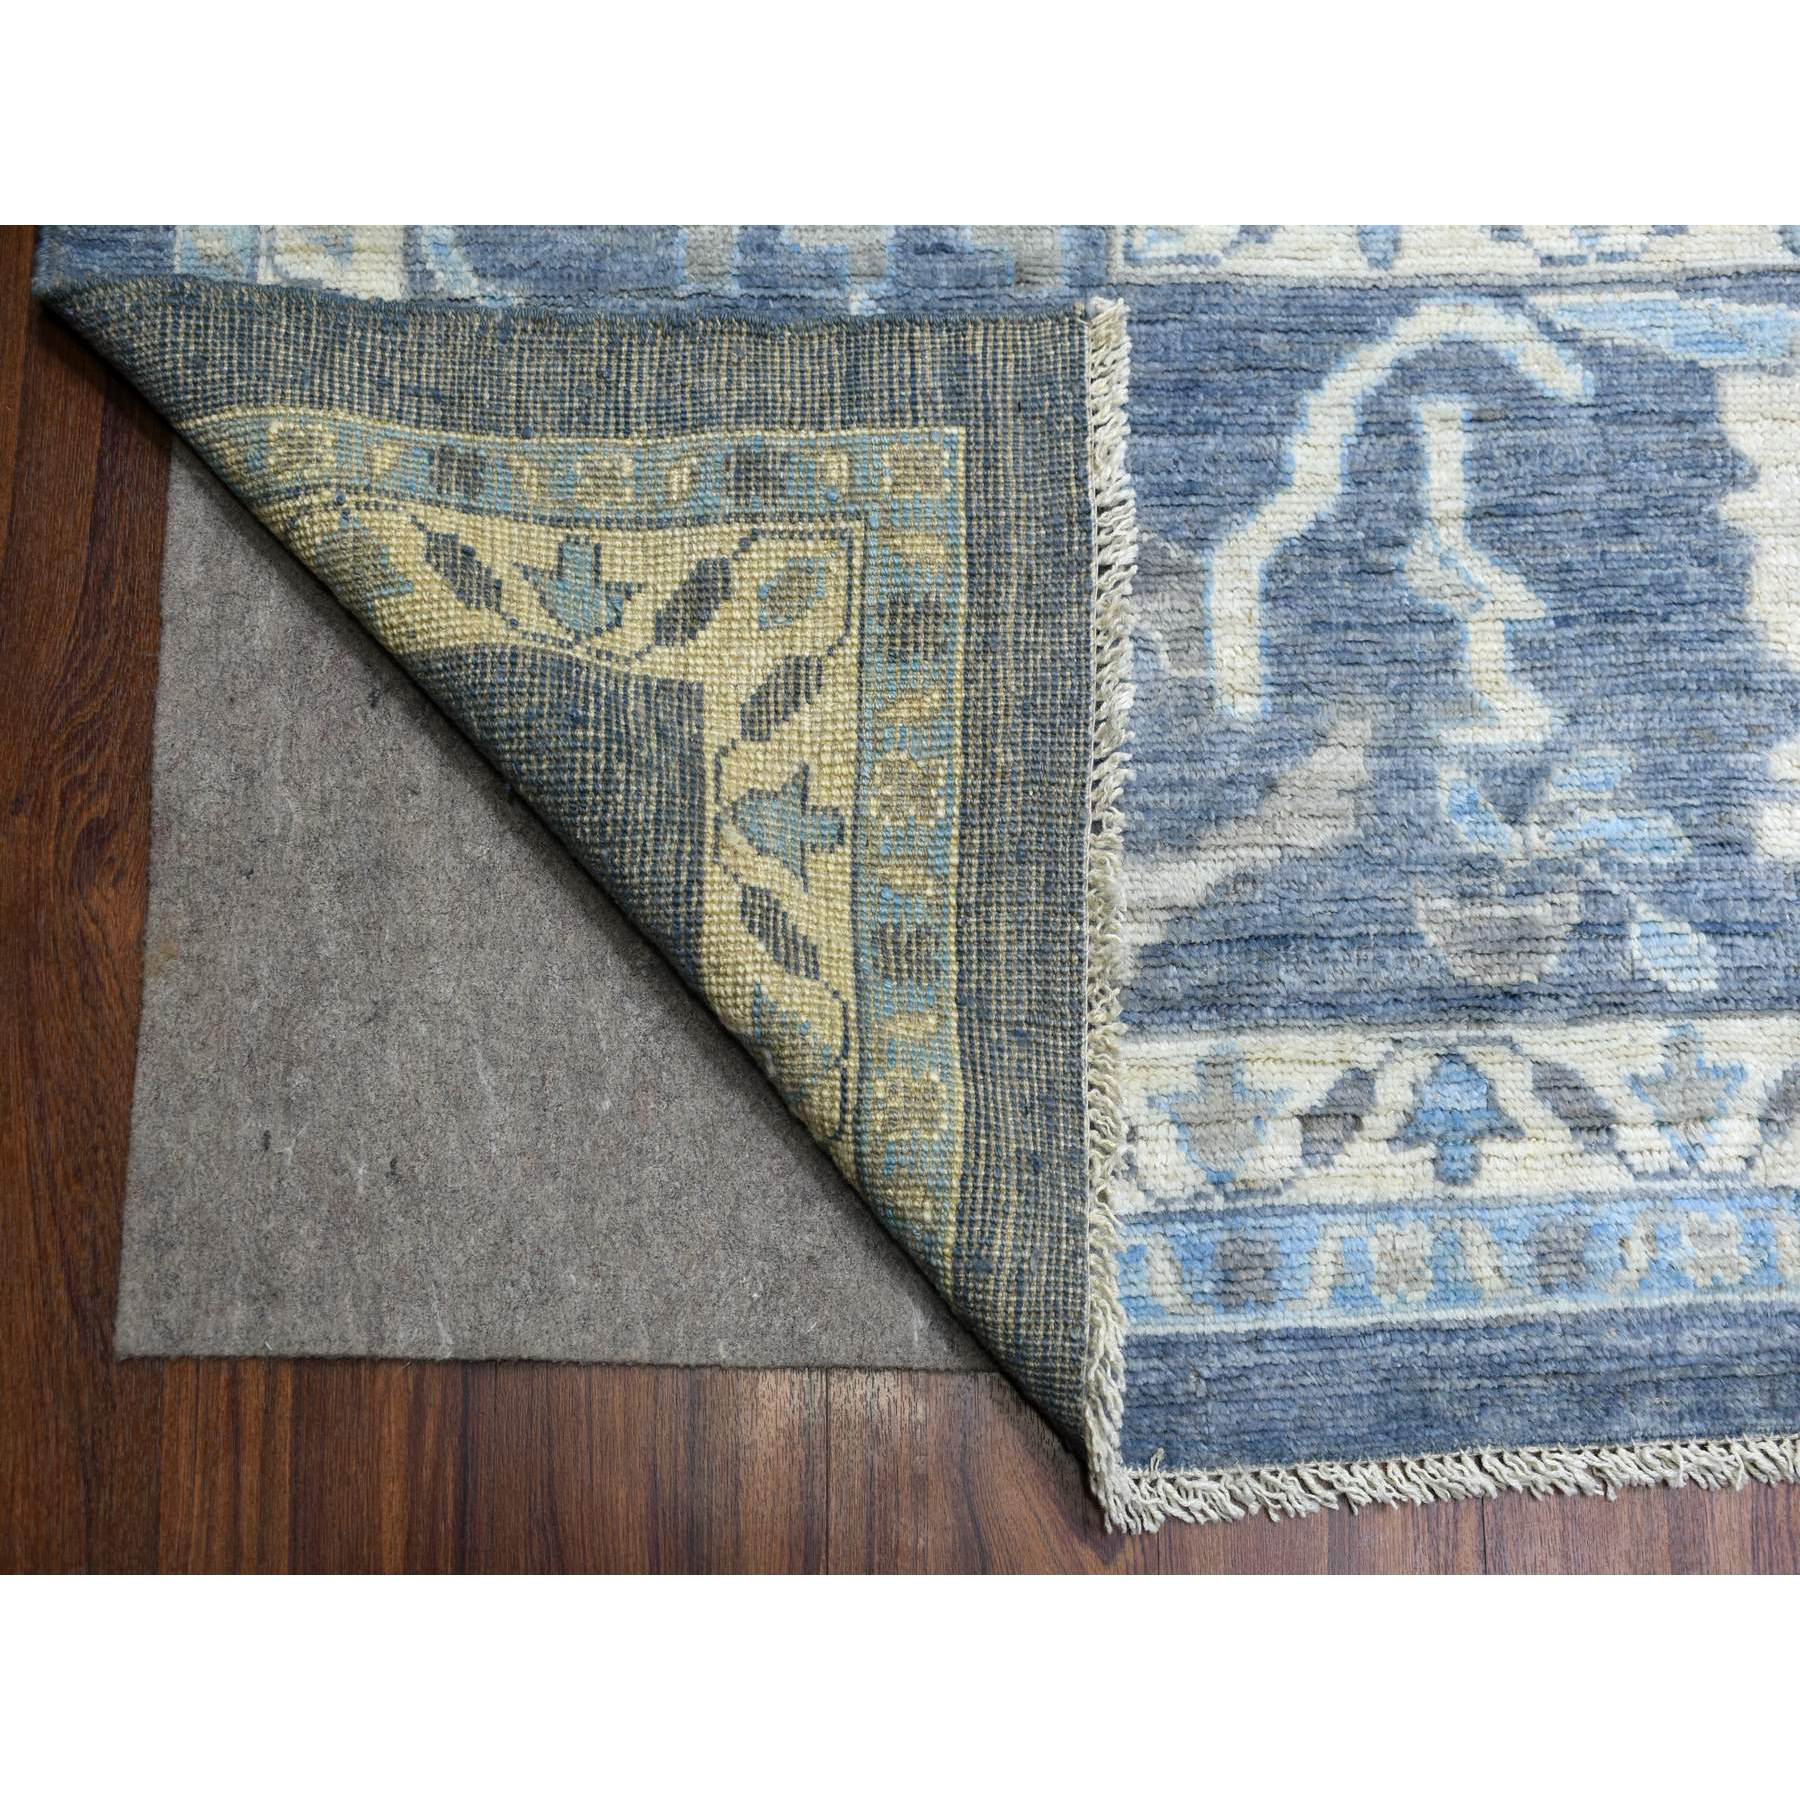 11'8"x14'5" Charcoal Gray with Touches of Blue and Ivory Angora Ushak Soft, Afghan Wool Hand Woven Oriental Oversized Rug 